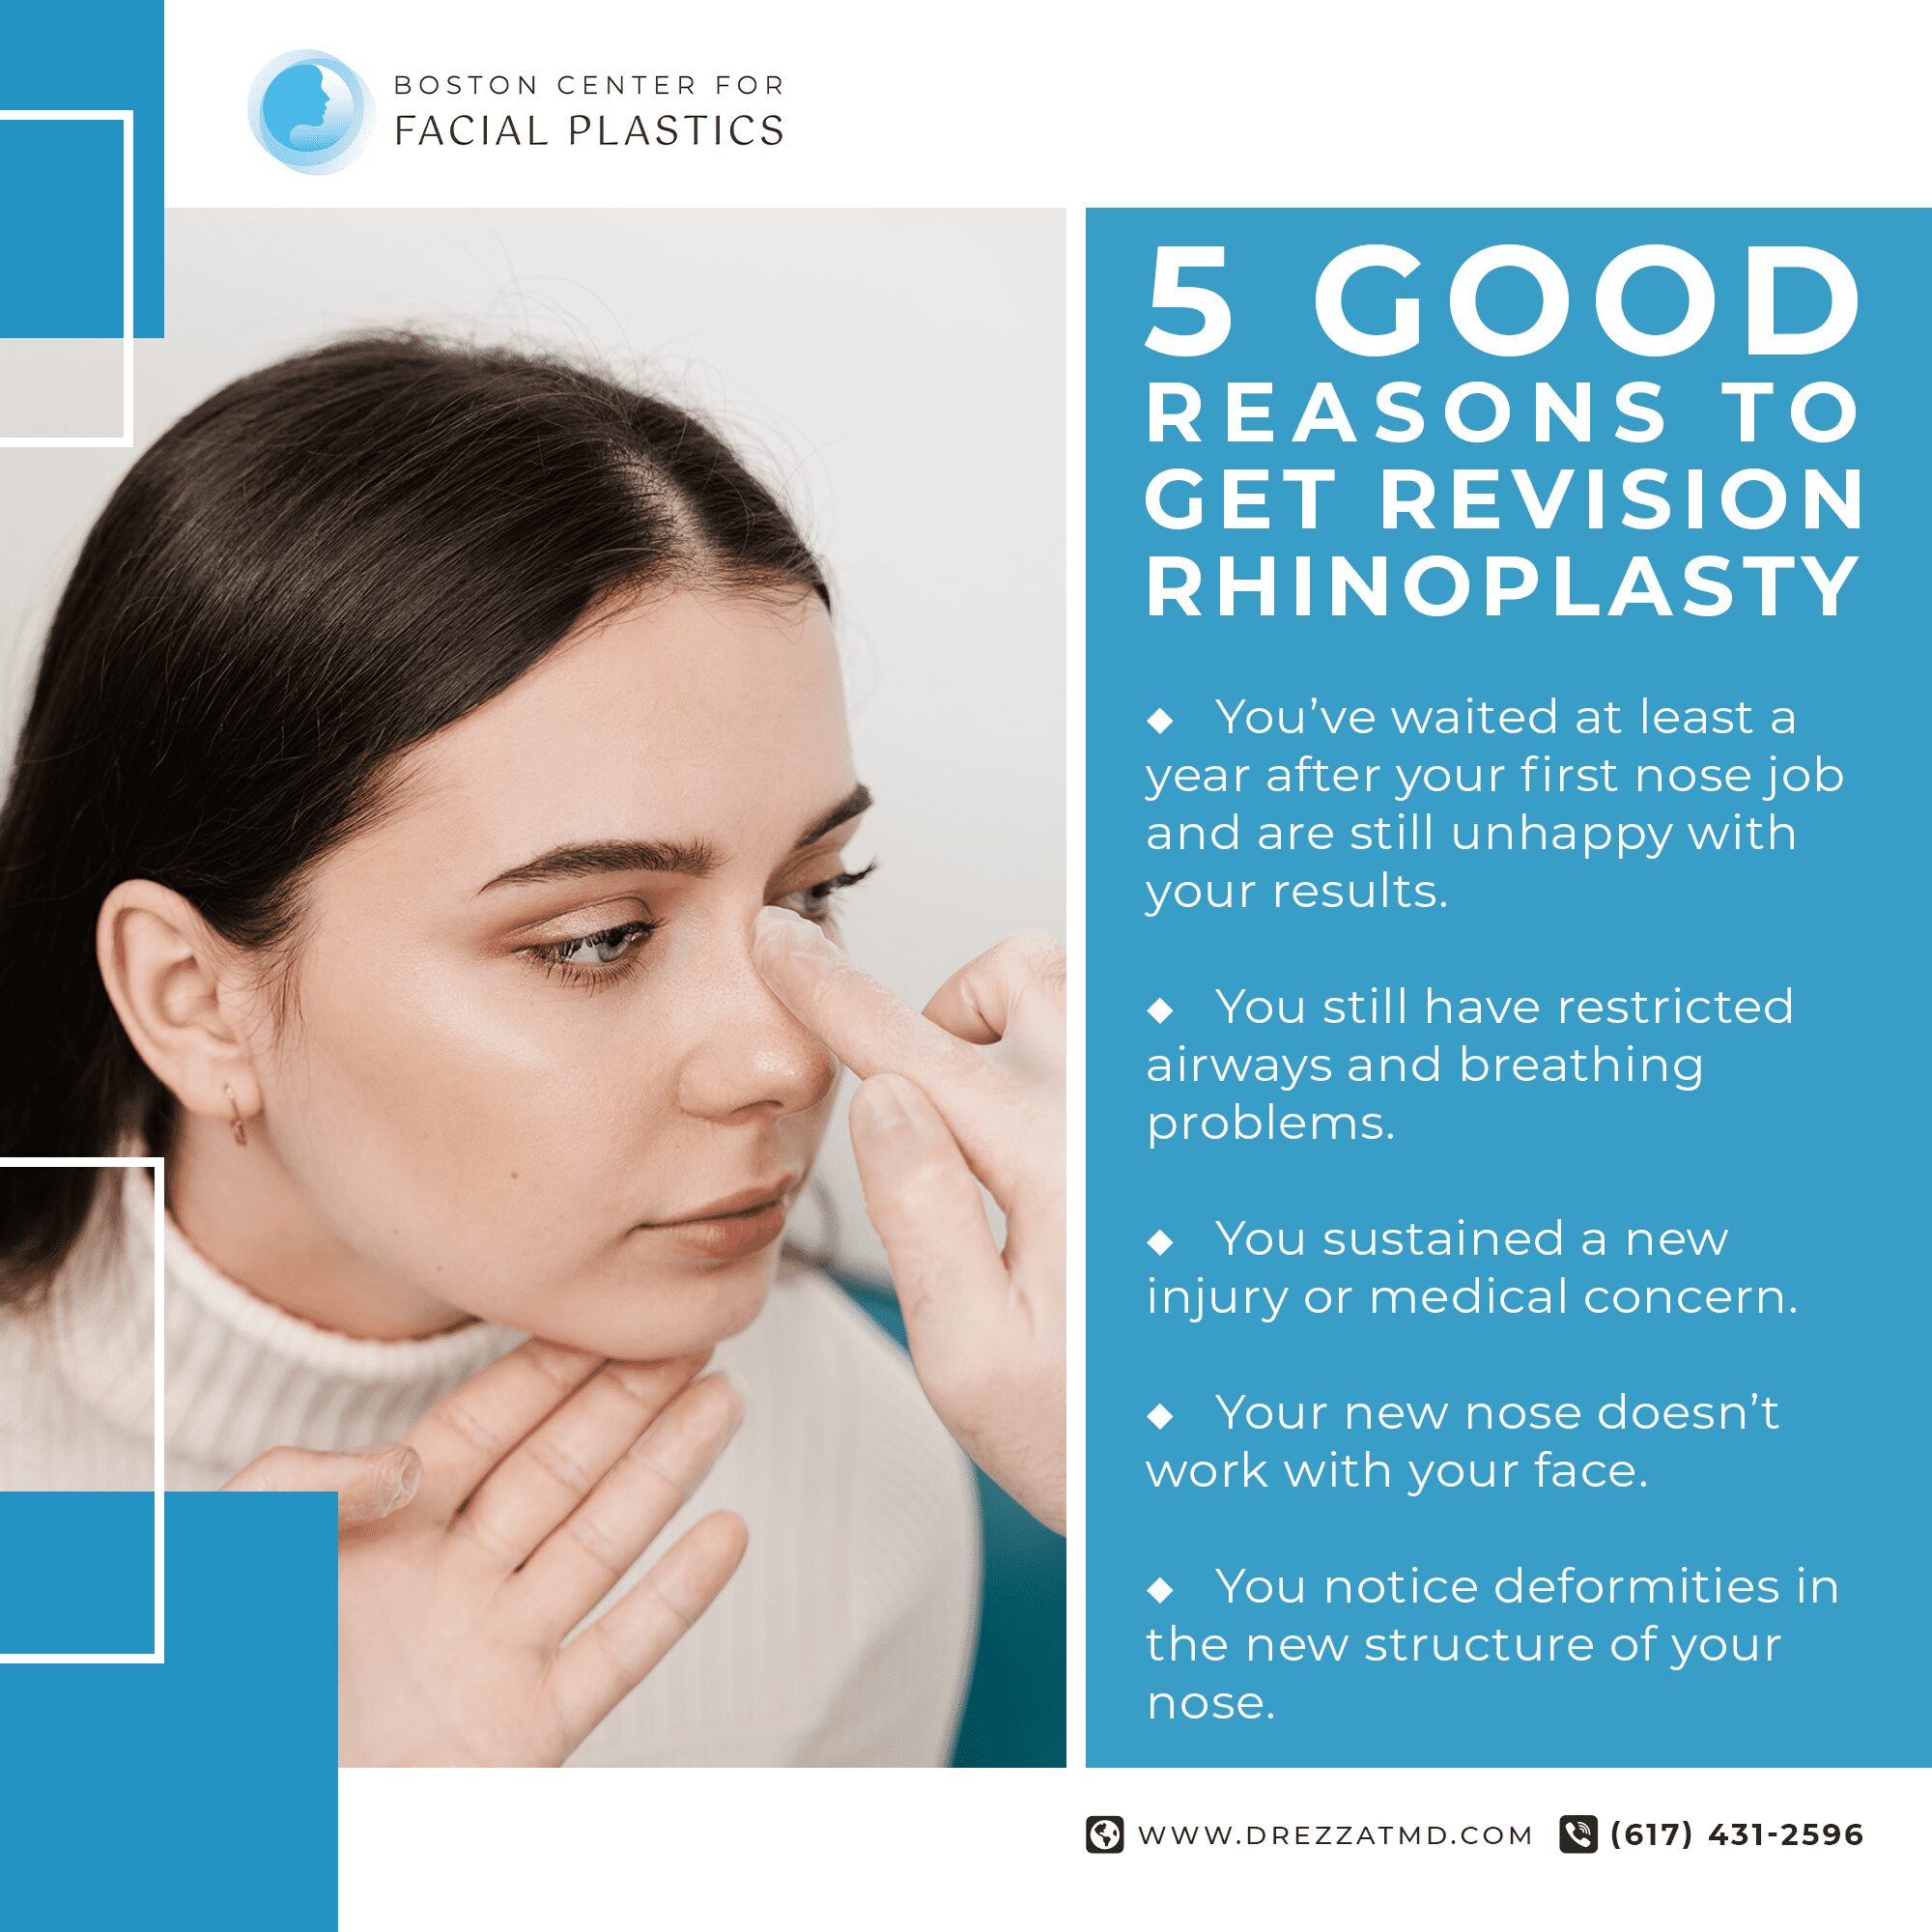 5 Good Reasons to Get Revision Rhinoplasty